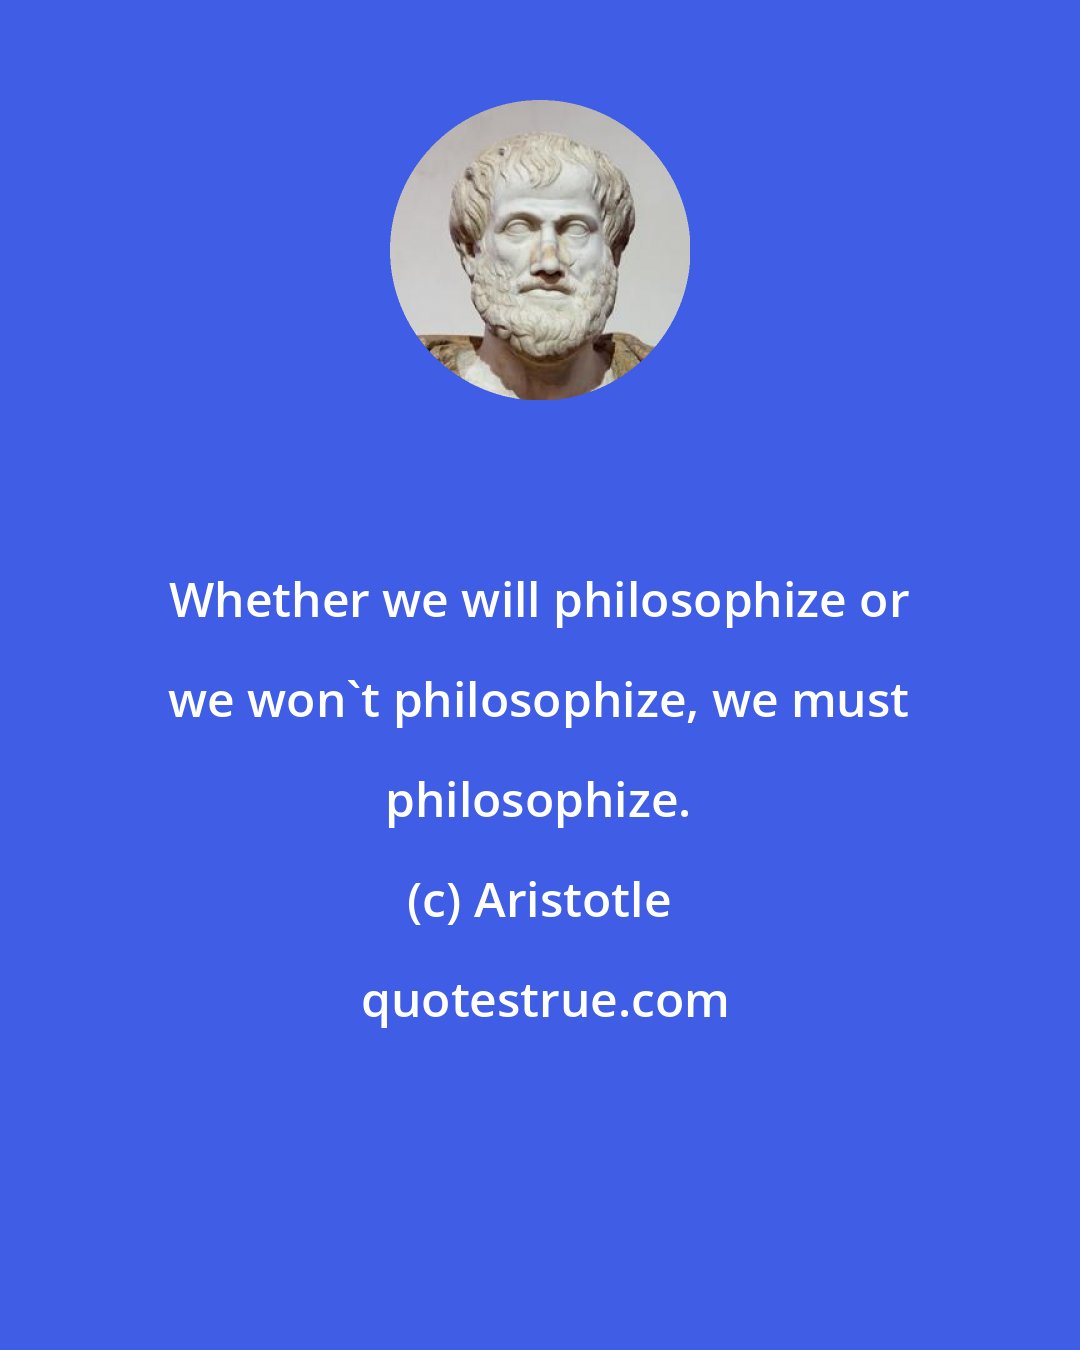 Aristotle: Whether we will philosophize or we won't philosophize, we must philosophize.